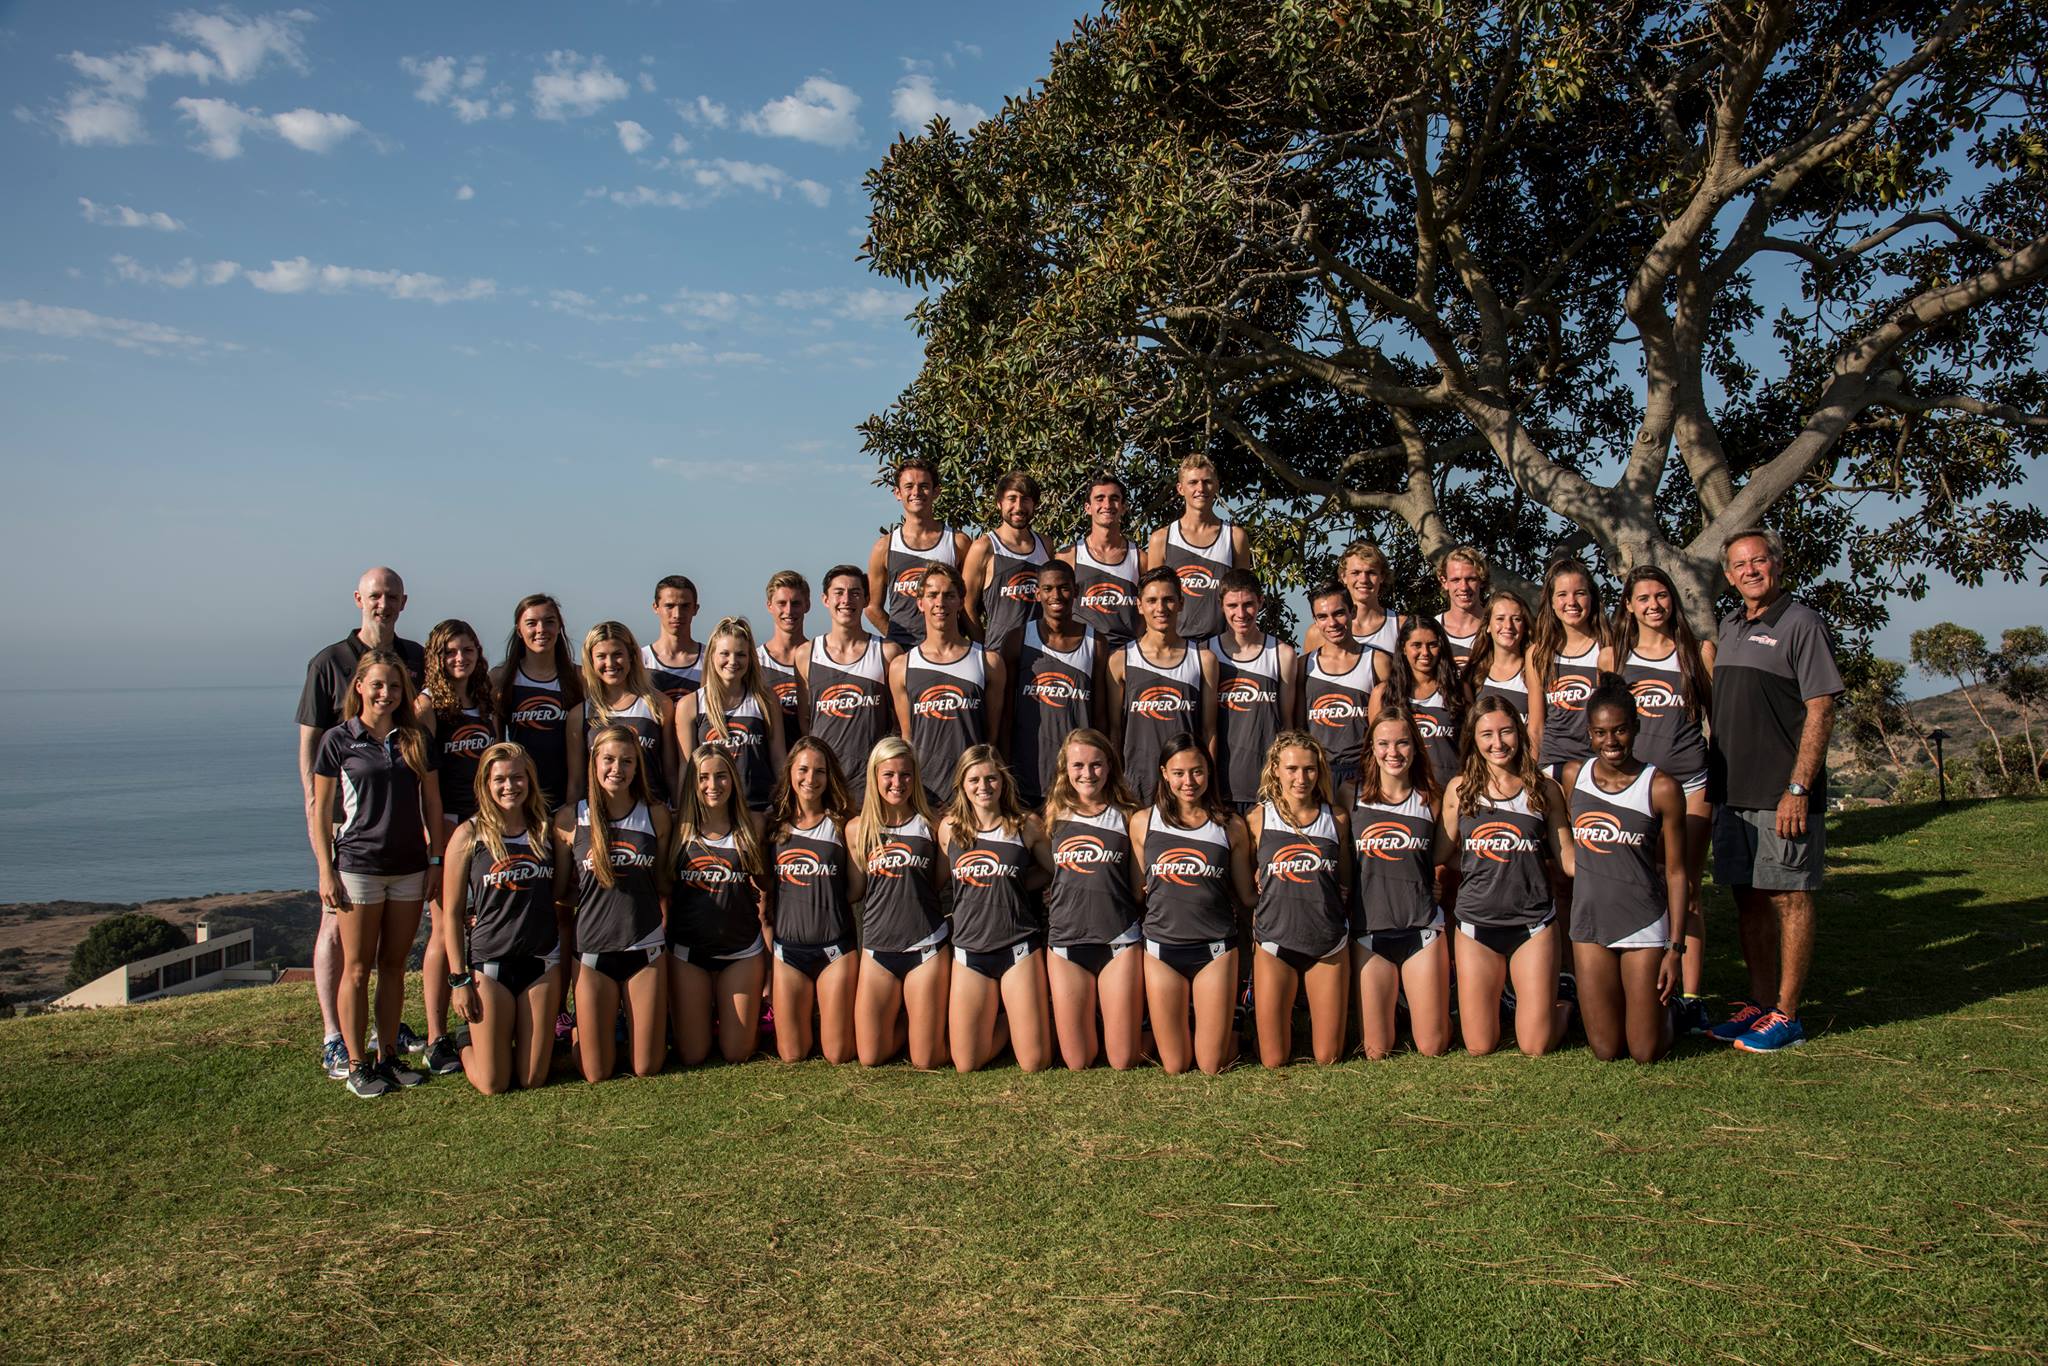 With XC Team Pictures